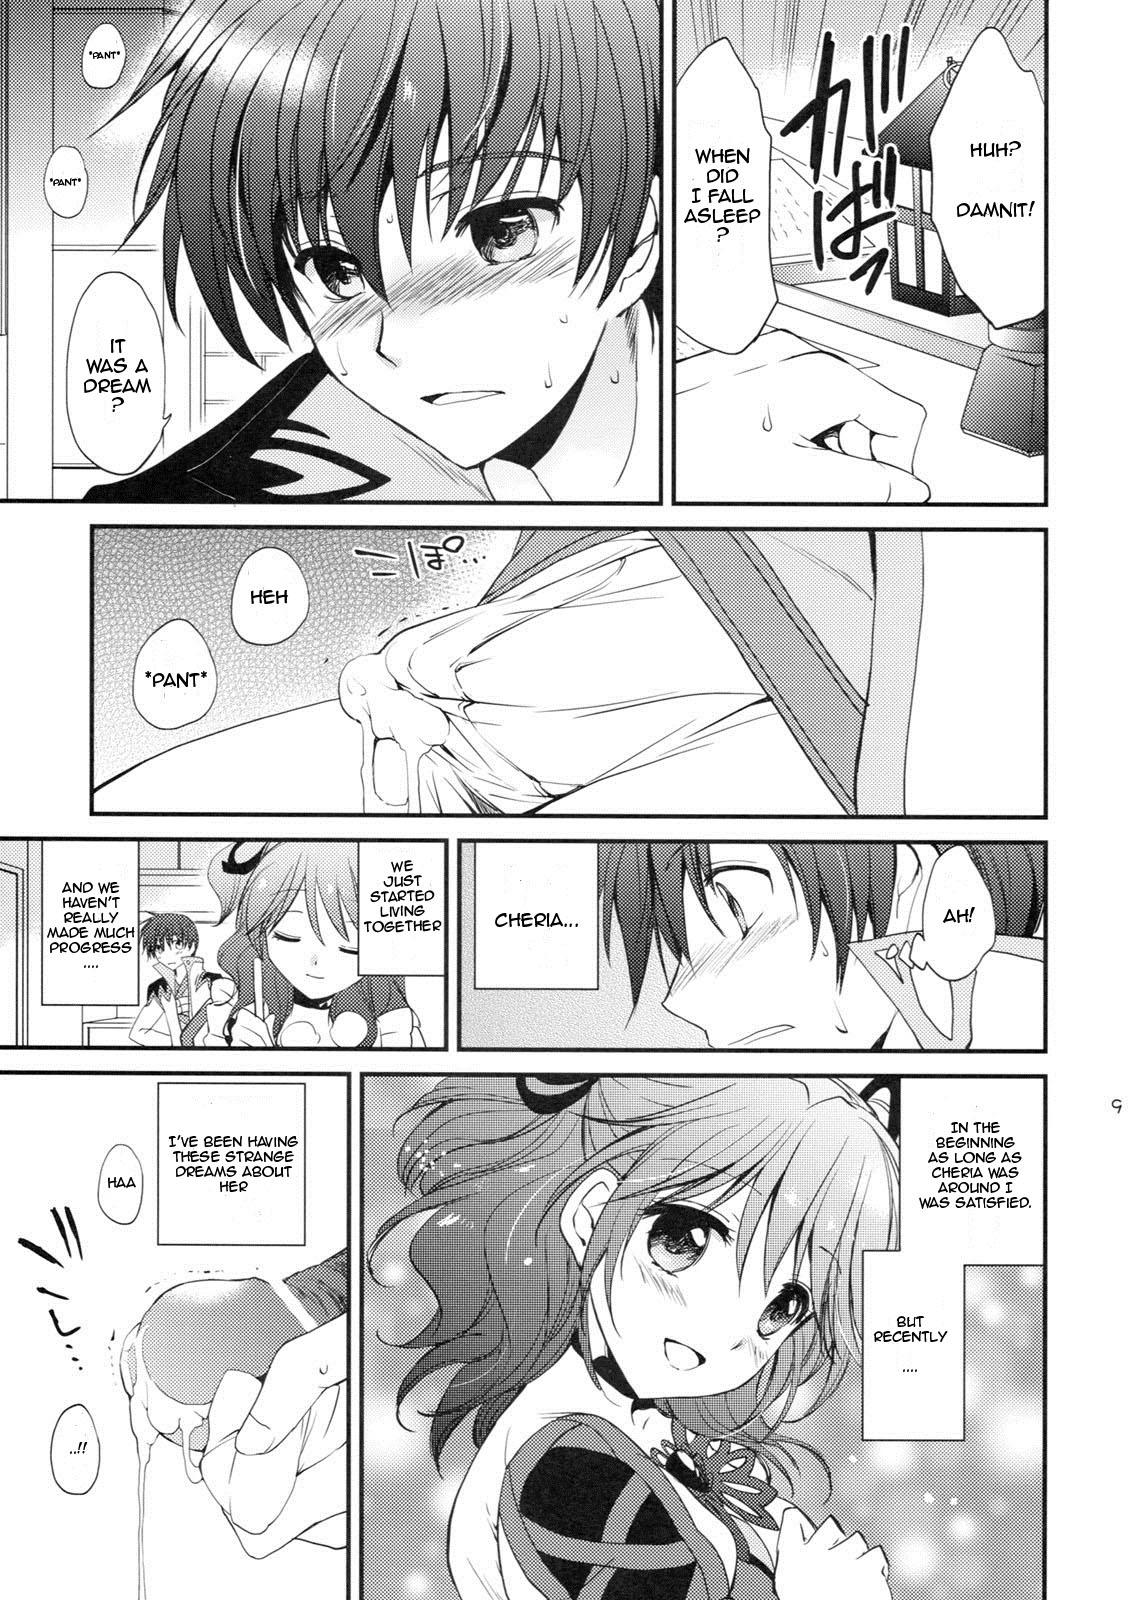 Cocksucking Cherish - Tales of graces Action - Page 8